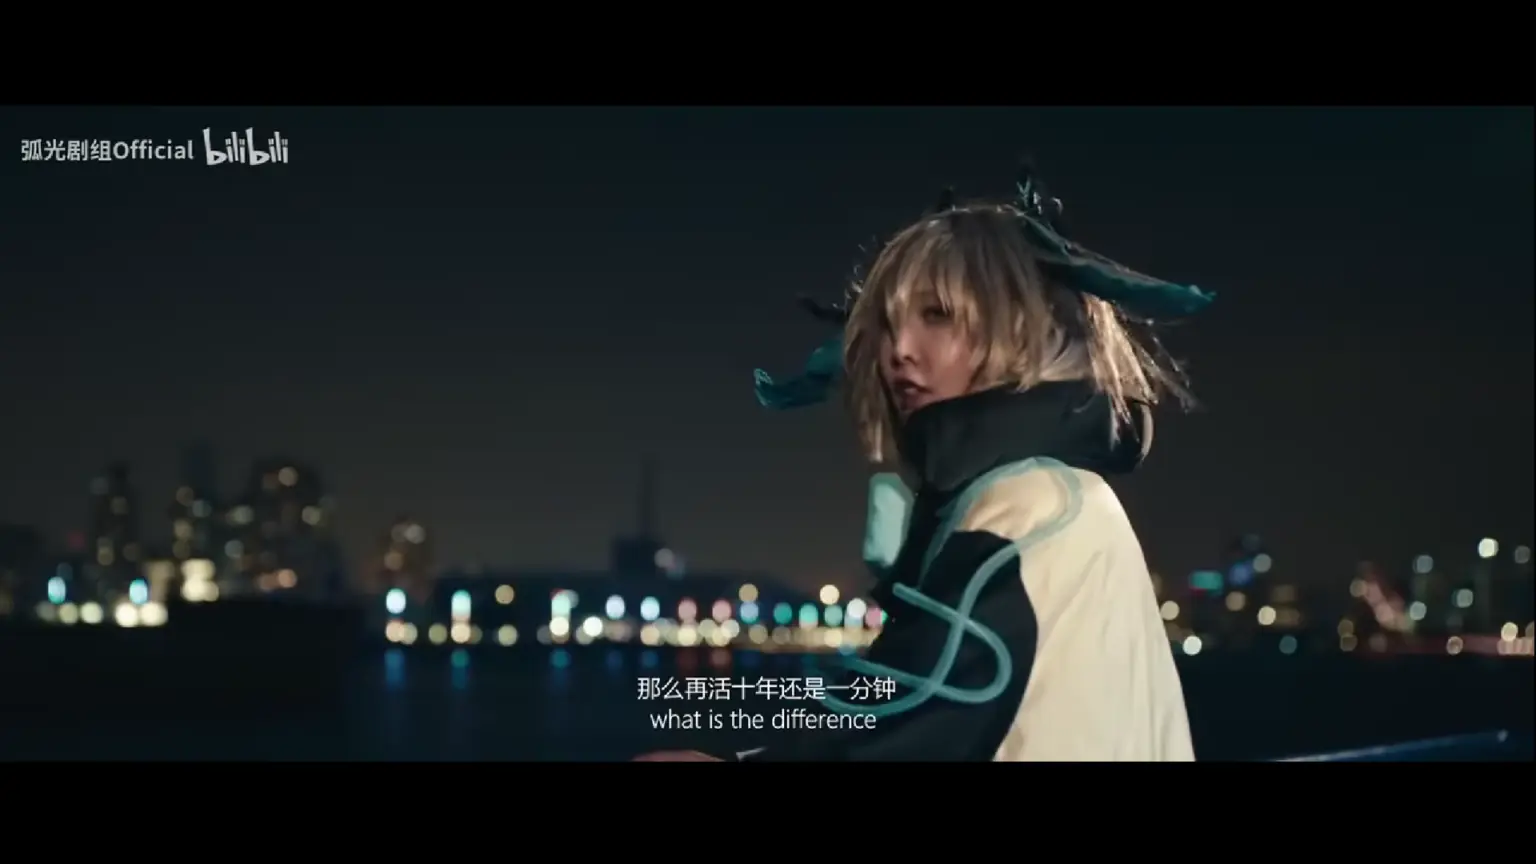 Amazing Arknights live action is produced by fans